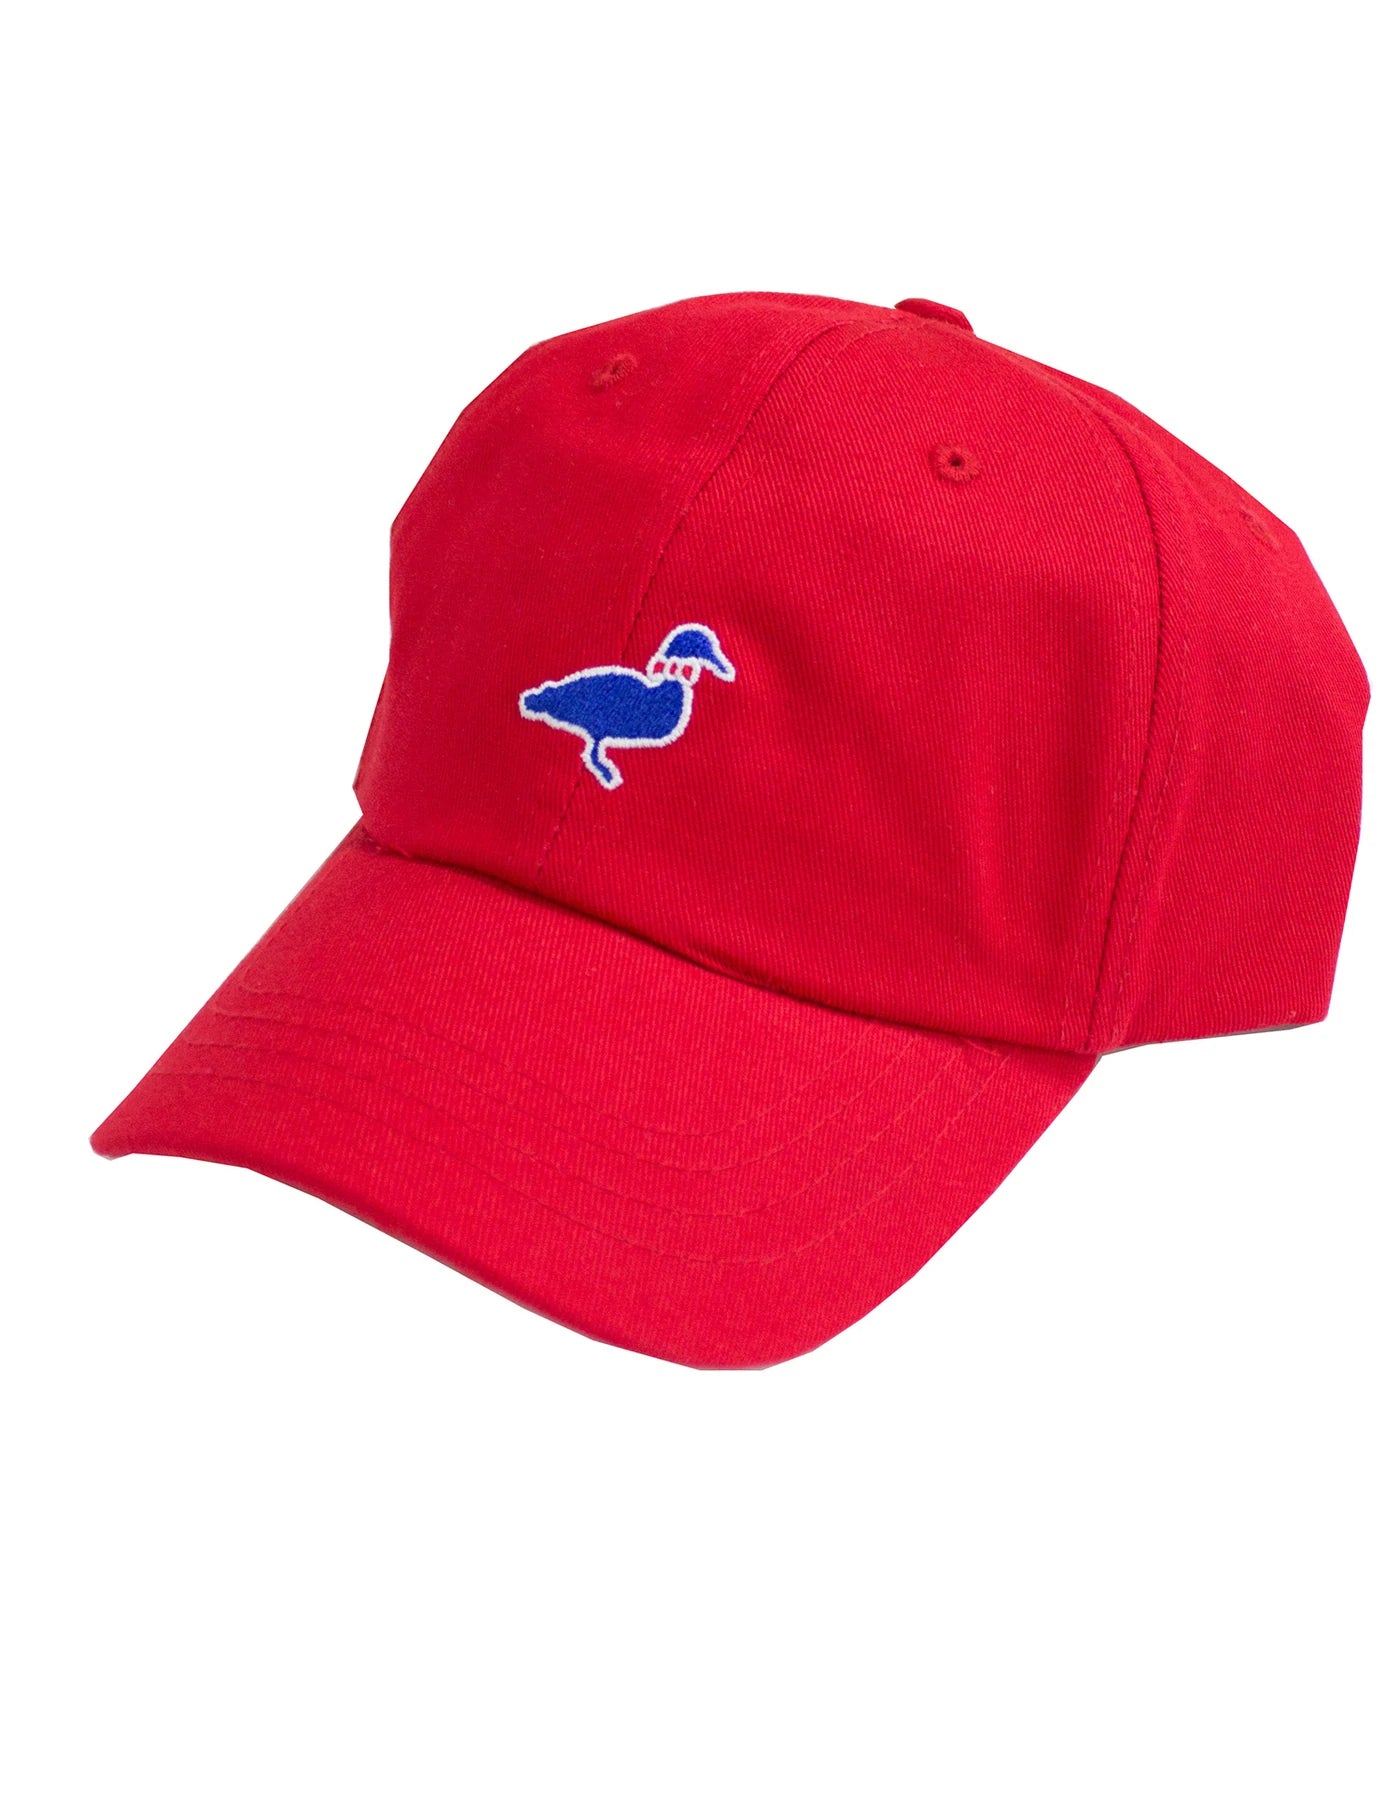 Youth Cotton Hat True Red